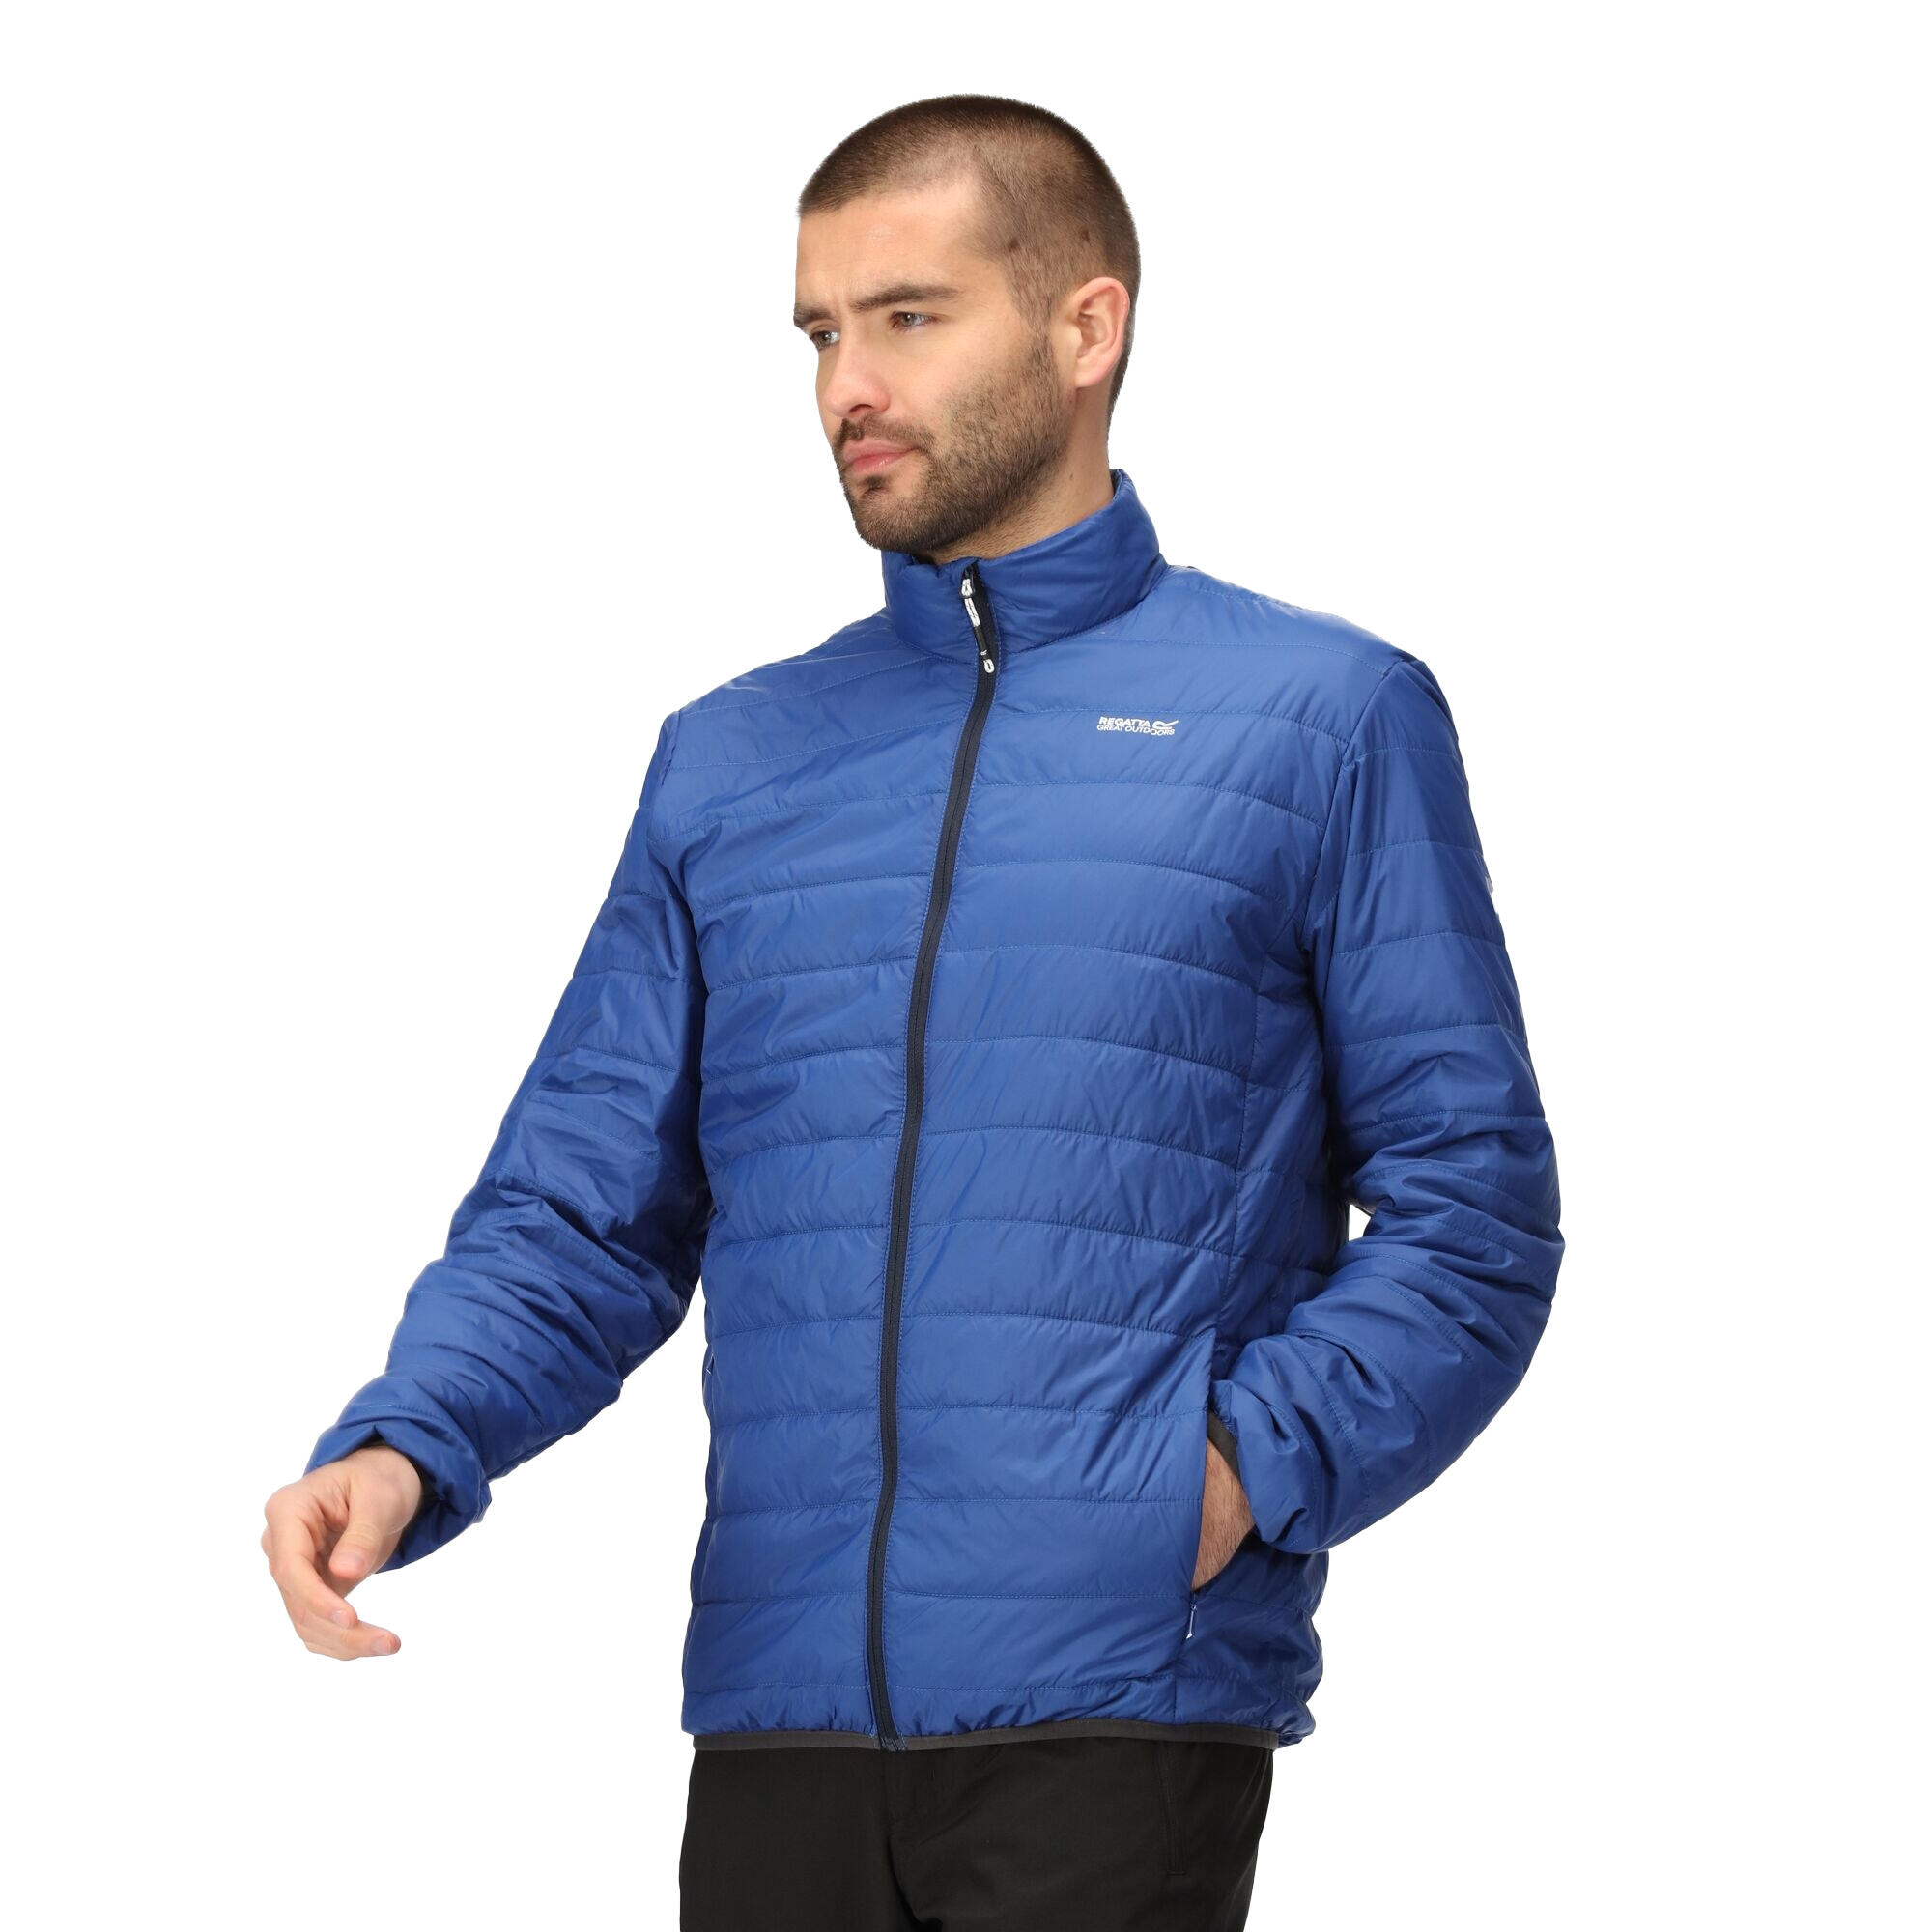 Mens Hillpack Quilted Insulated Jacket (New Royal/Strong Blue) 4/5